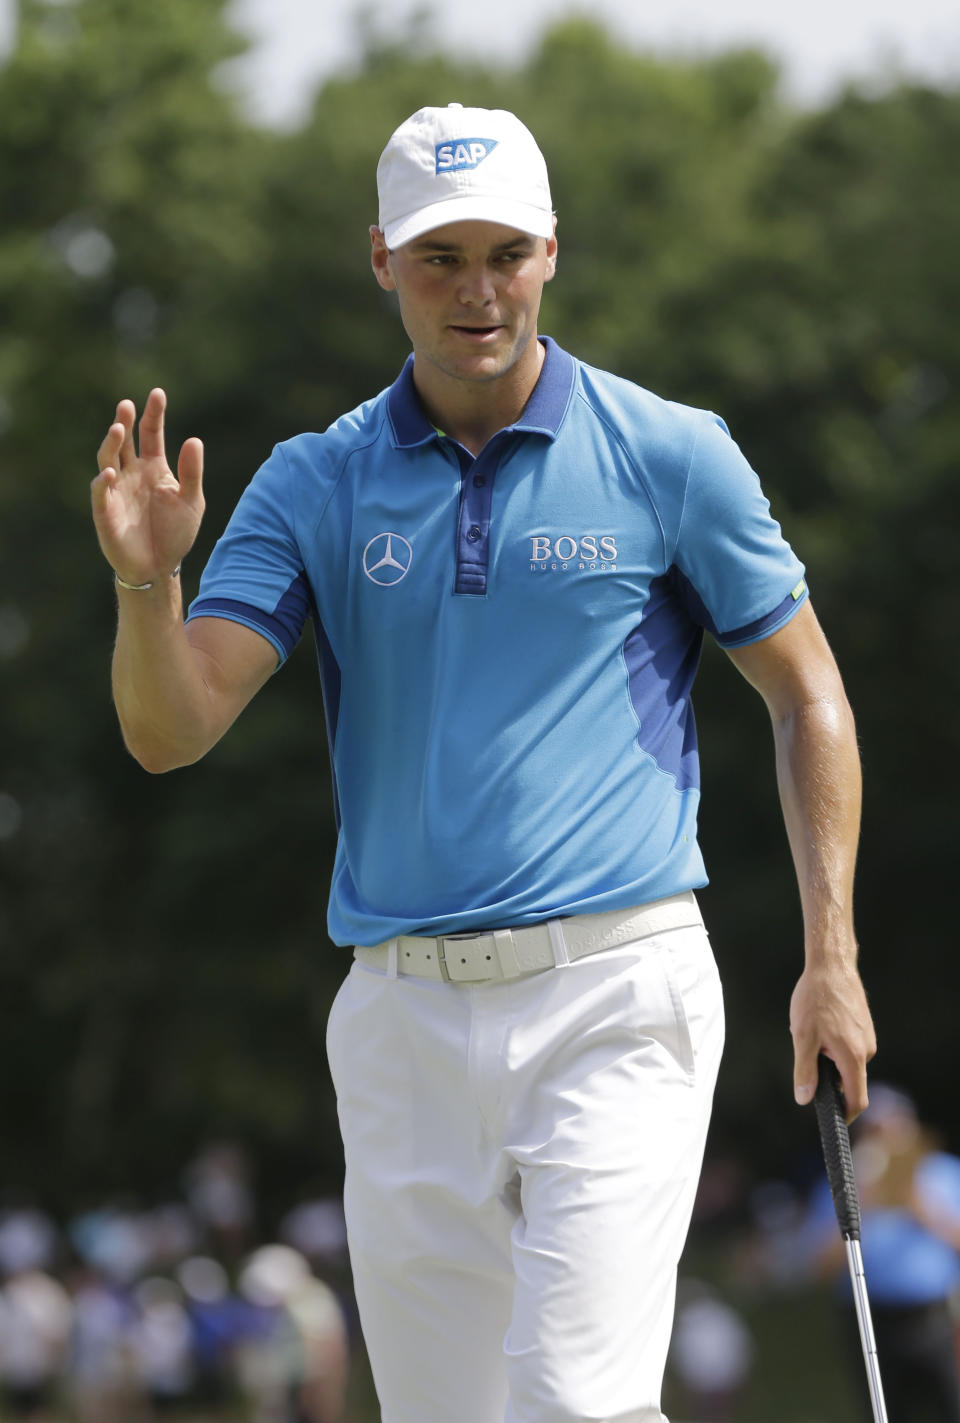 Martin Kaymer, of Germany, waves after making birdie on the sixth hole during the third round of The Players championship golf tournament at TPC Sawgrass, Saturday, May 10, 2014, in Ponte Vedra Beach, Fla. (AP Photo/Gerald Herbert)